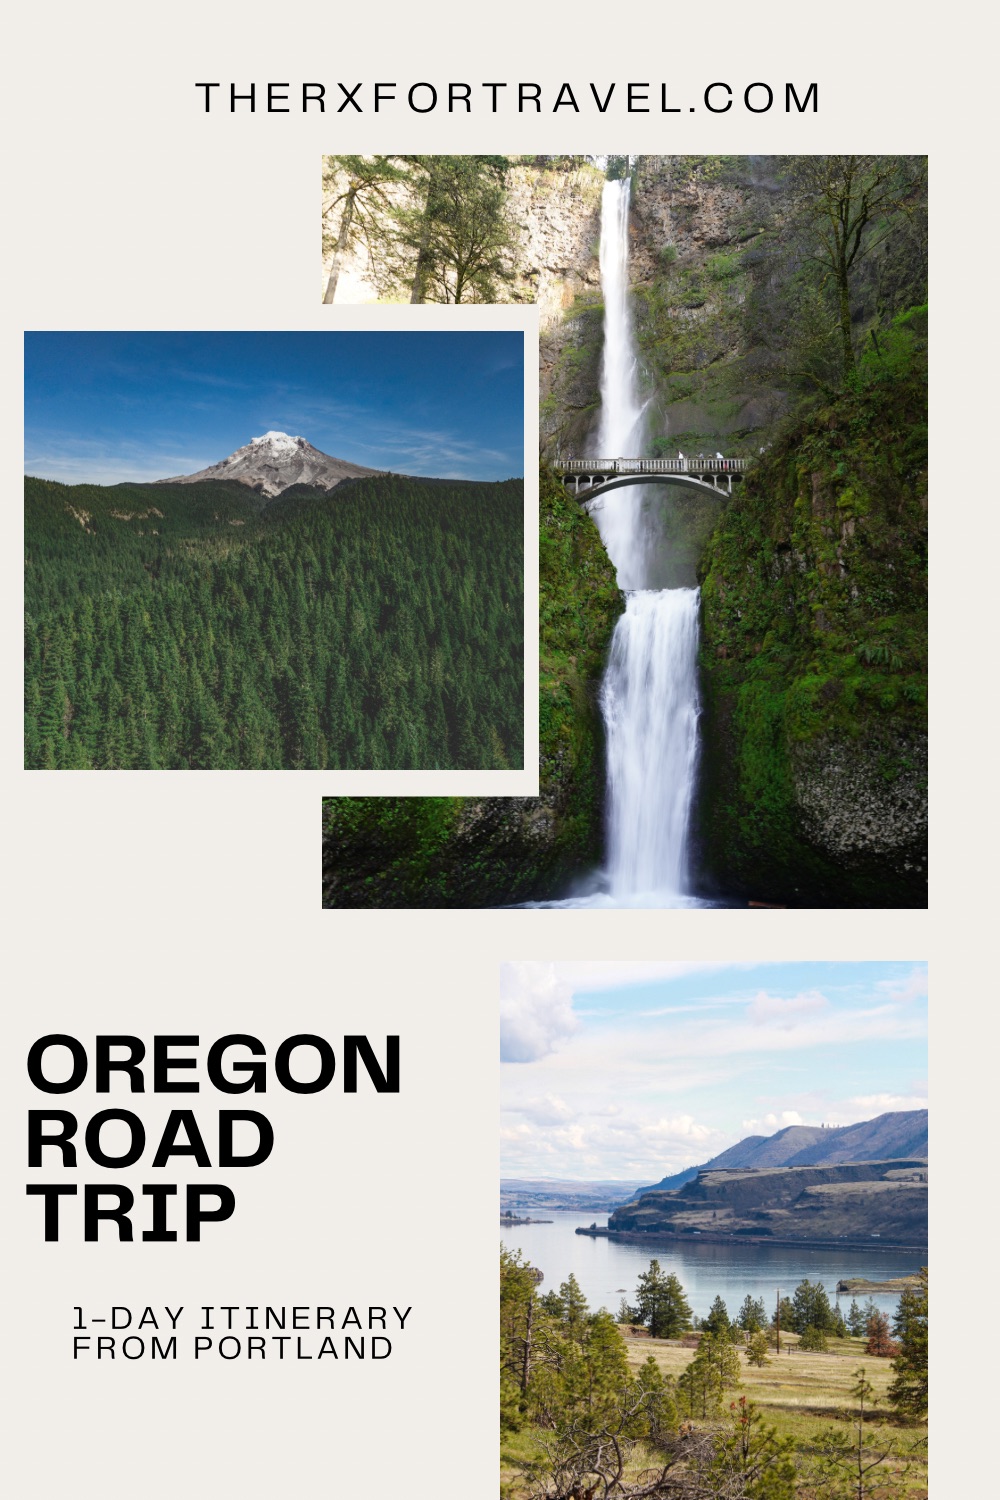 In 1 day, you’ll adventure on an Oregon Road Trip from Portland to see scenic sights like Mount Hood, Colombia River Gorge, and Multnomah Falls.